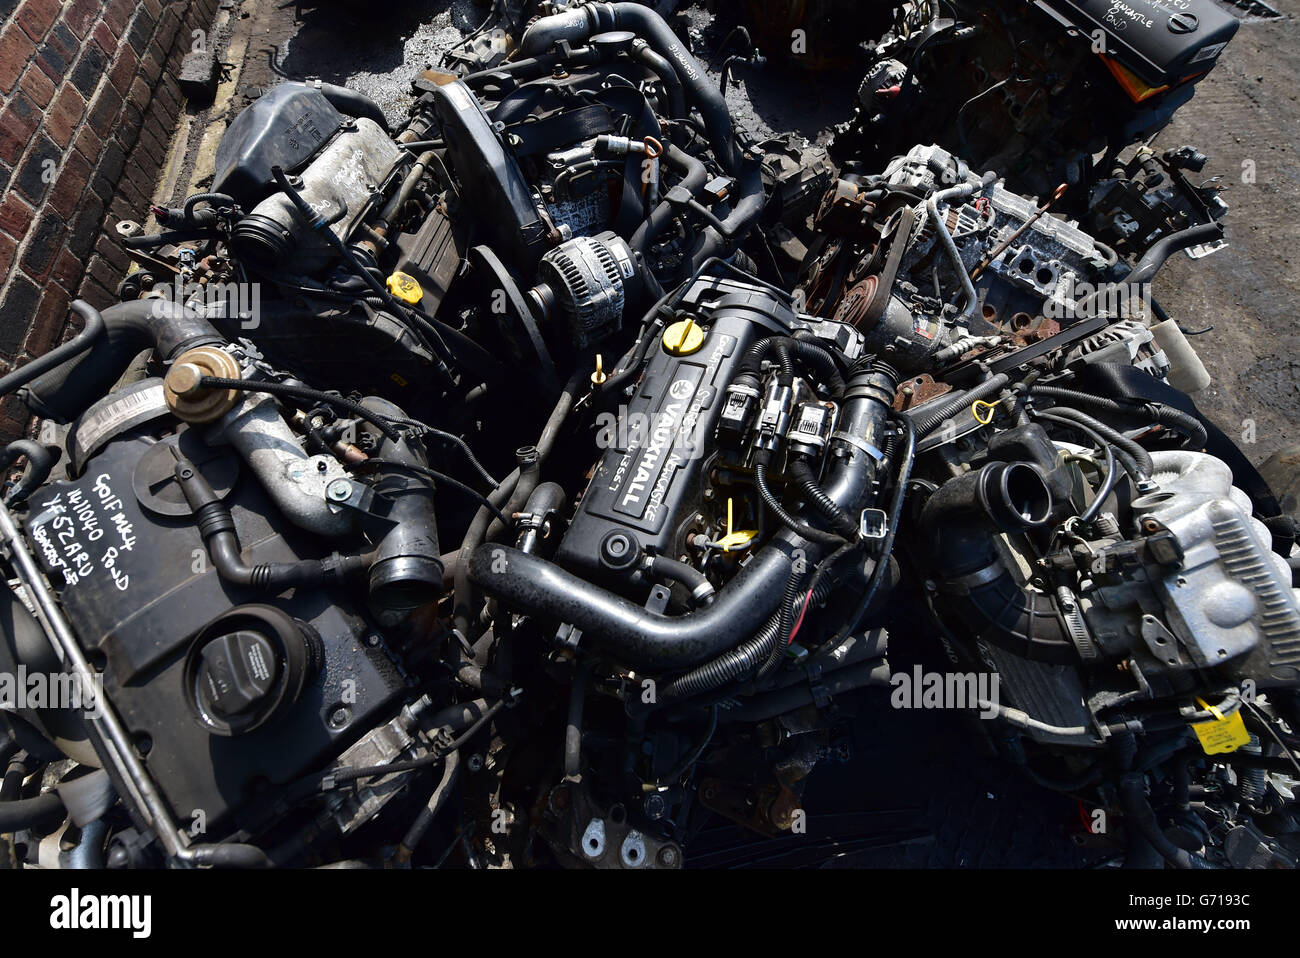 A view of engines at the UK's largest car dismantlers, Motor Hog in North Shields, Tyneside, which has bought specialist dismantling and de-polluting equipment capable of handling over 200 vehicles per day and crushing hundreds of thousands a year. Stock Photo